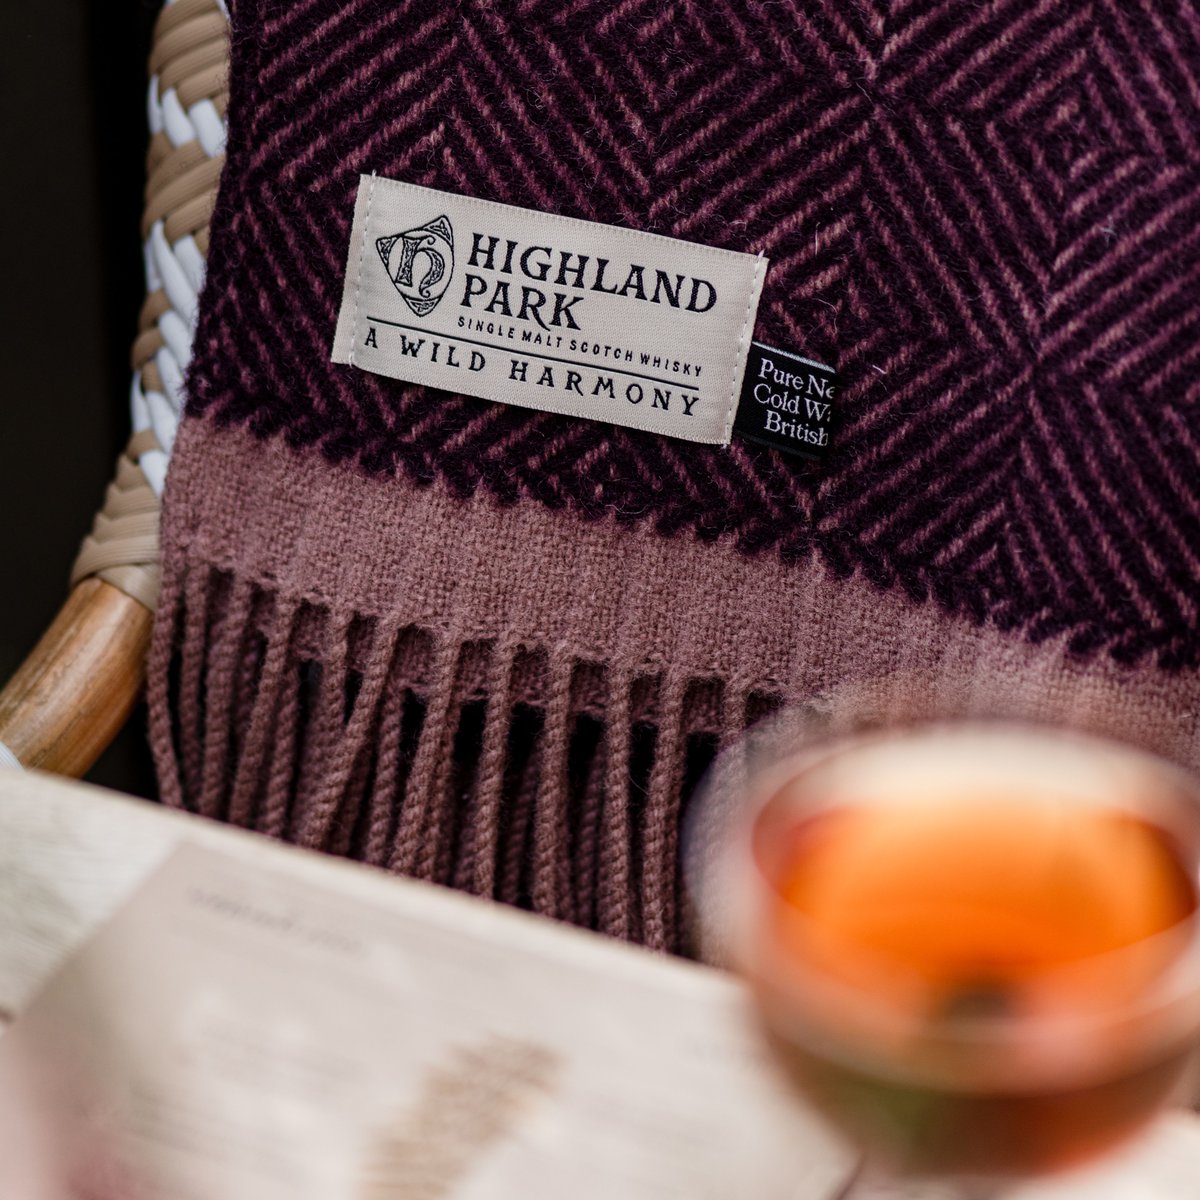 🎉 Exciting news from London! In partnership with Pantechnicon, we bring you the essence of Orkney Island at their Belgravia Roof Garden. Experience the Highland Park Hideaway with us 🍹now till Dec 31st. Details on the Pantechnicon website. #HighlandPark Enjoy responsibly.